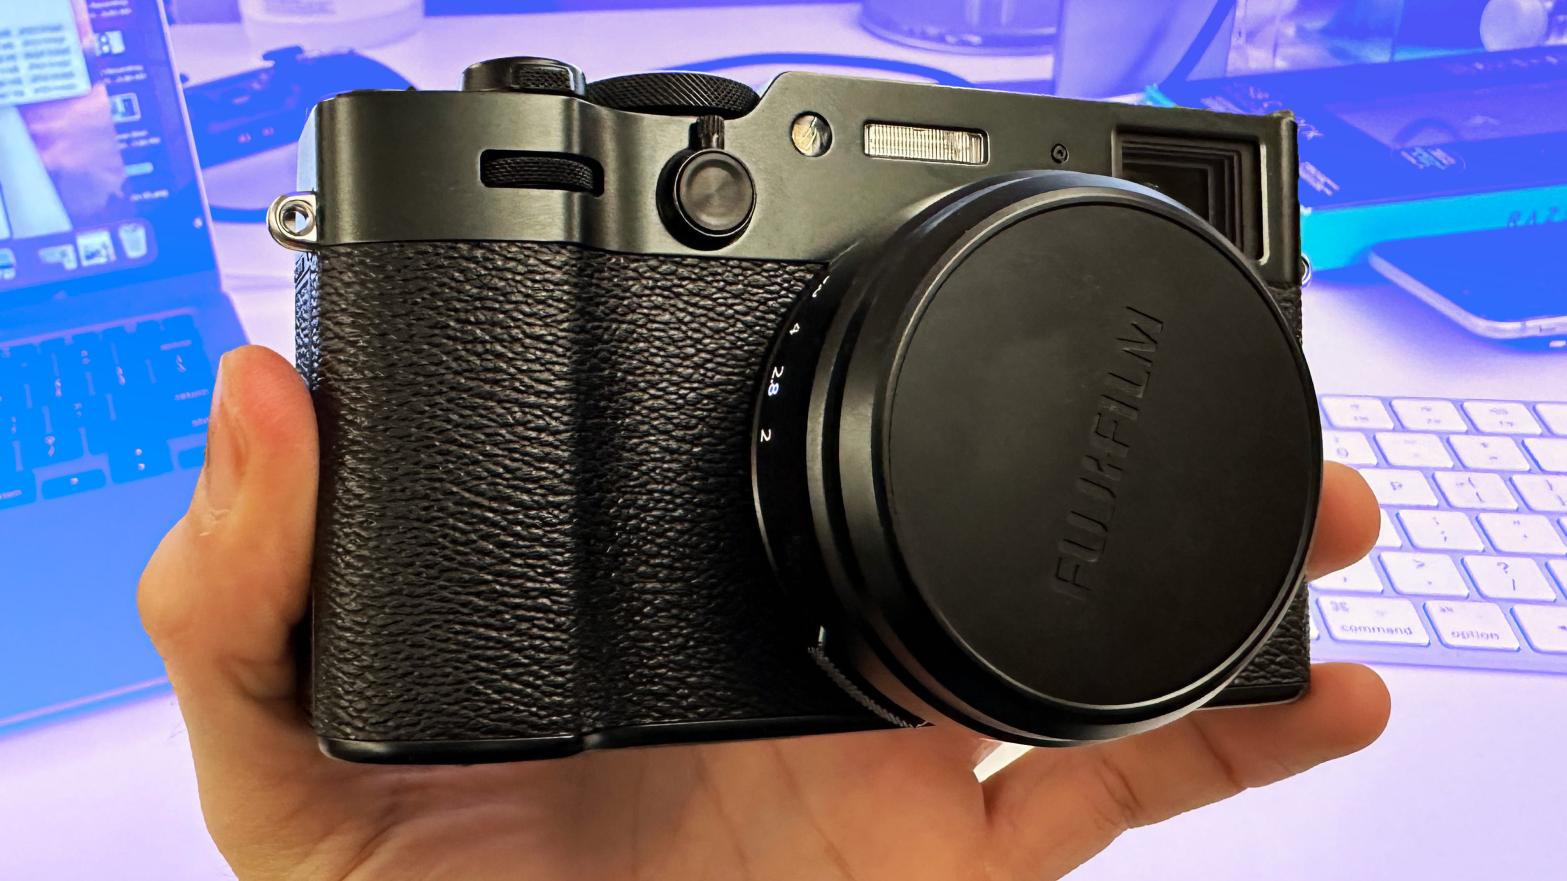 Fujifilm X100VI Hands-on: One Hell of a Snappy Digital Camera for the TikTok Generation